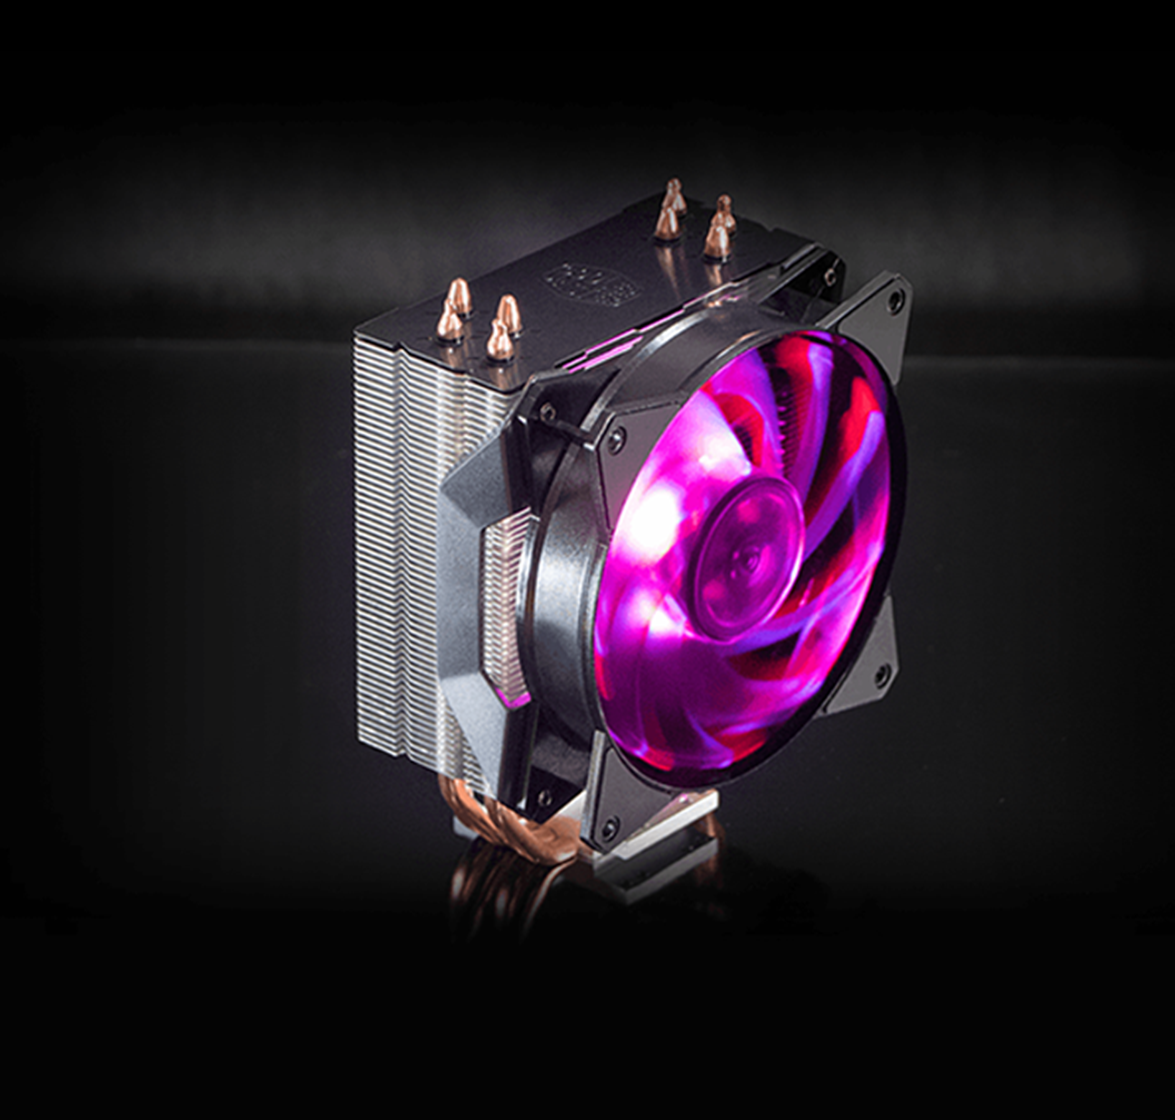 Fn1157 Map – t4pn – 220pc – R1  Cooler Master masterair ma410p CPU Cooler for Intel/amd Both